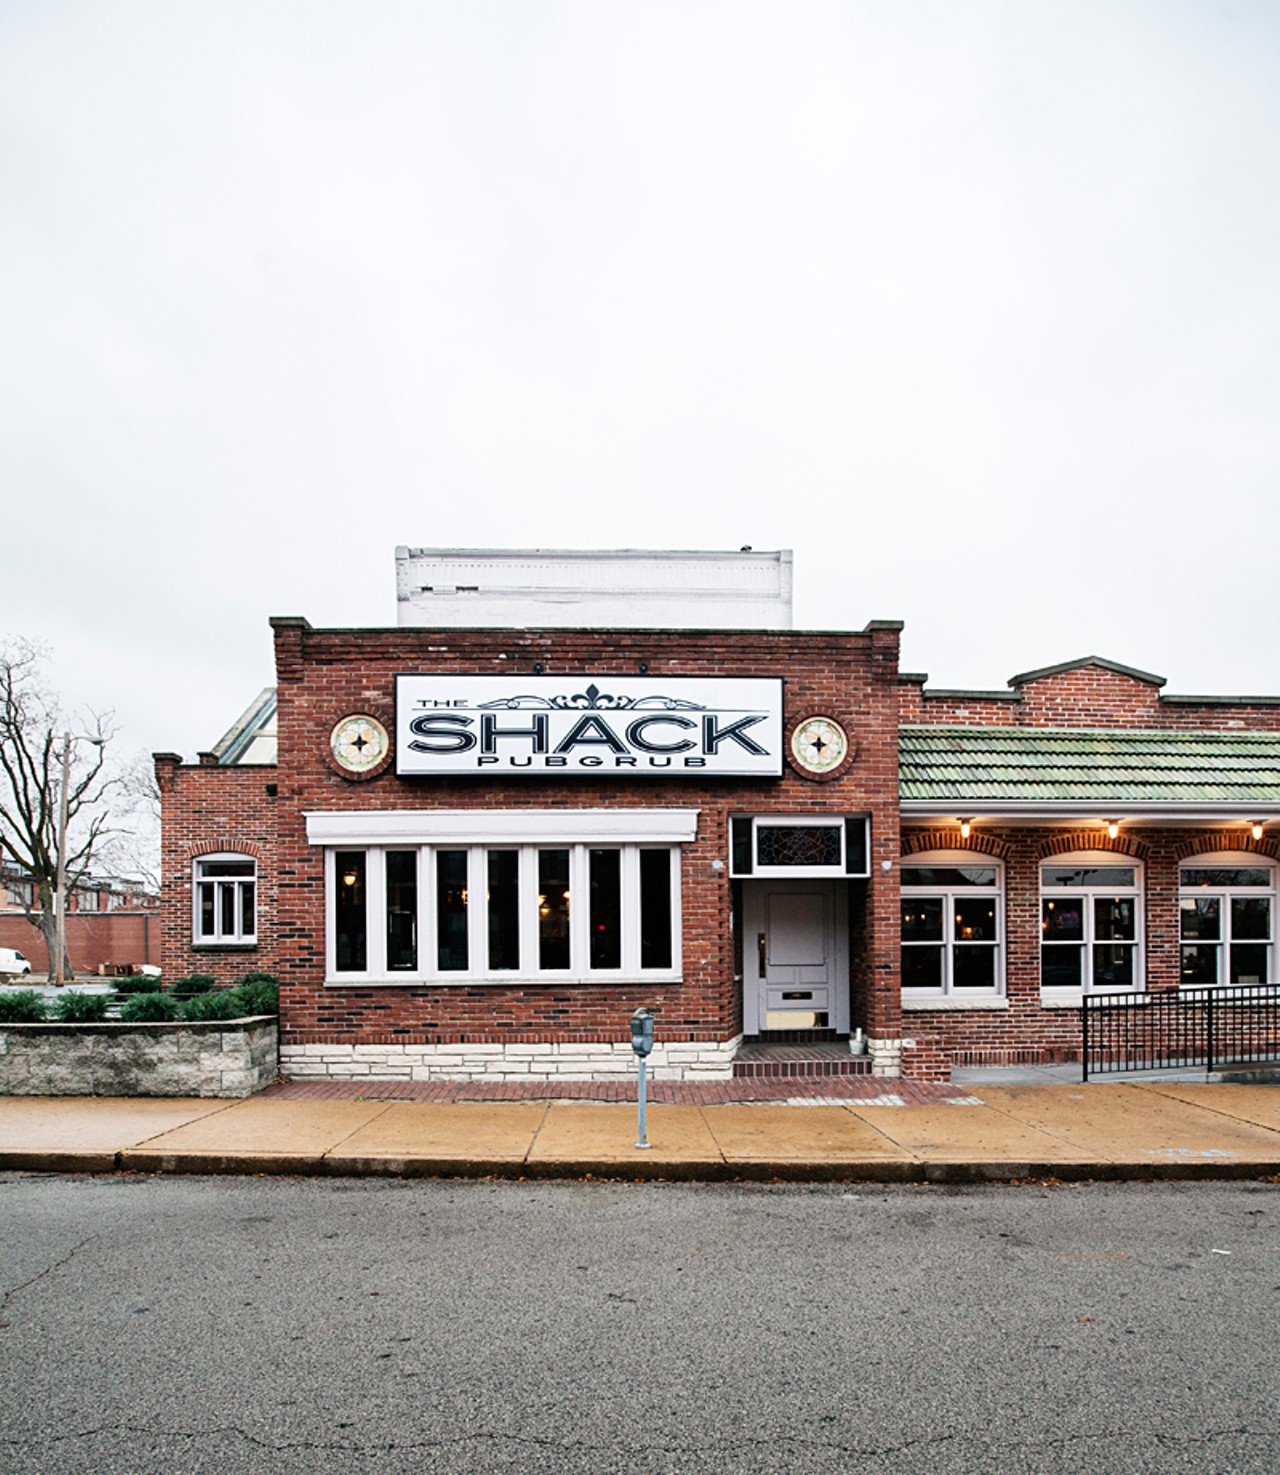 Shack Pubgrub on Laclede in midtown.